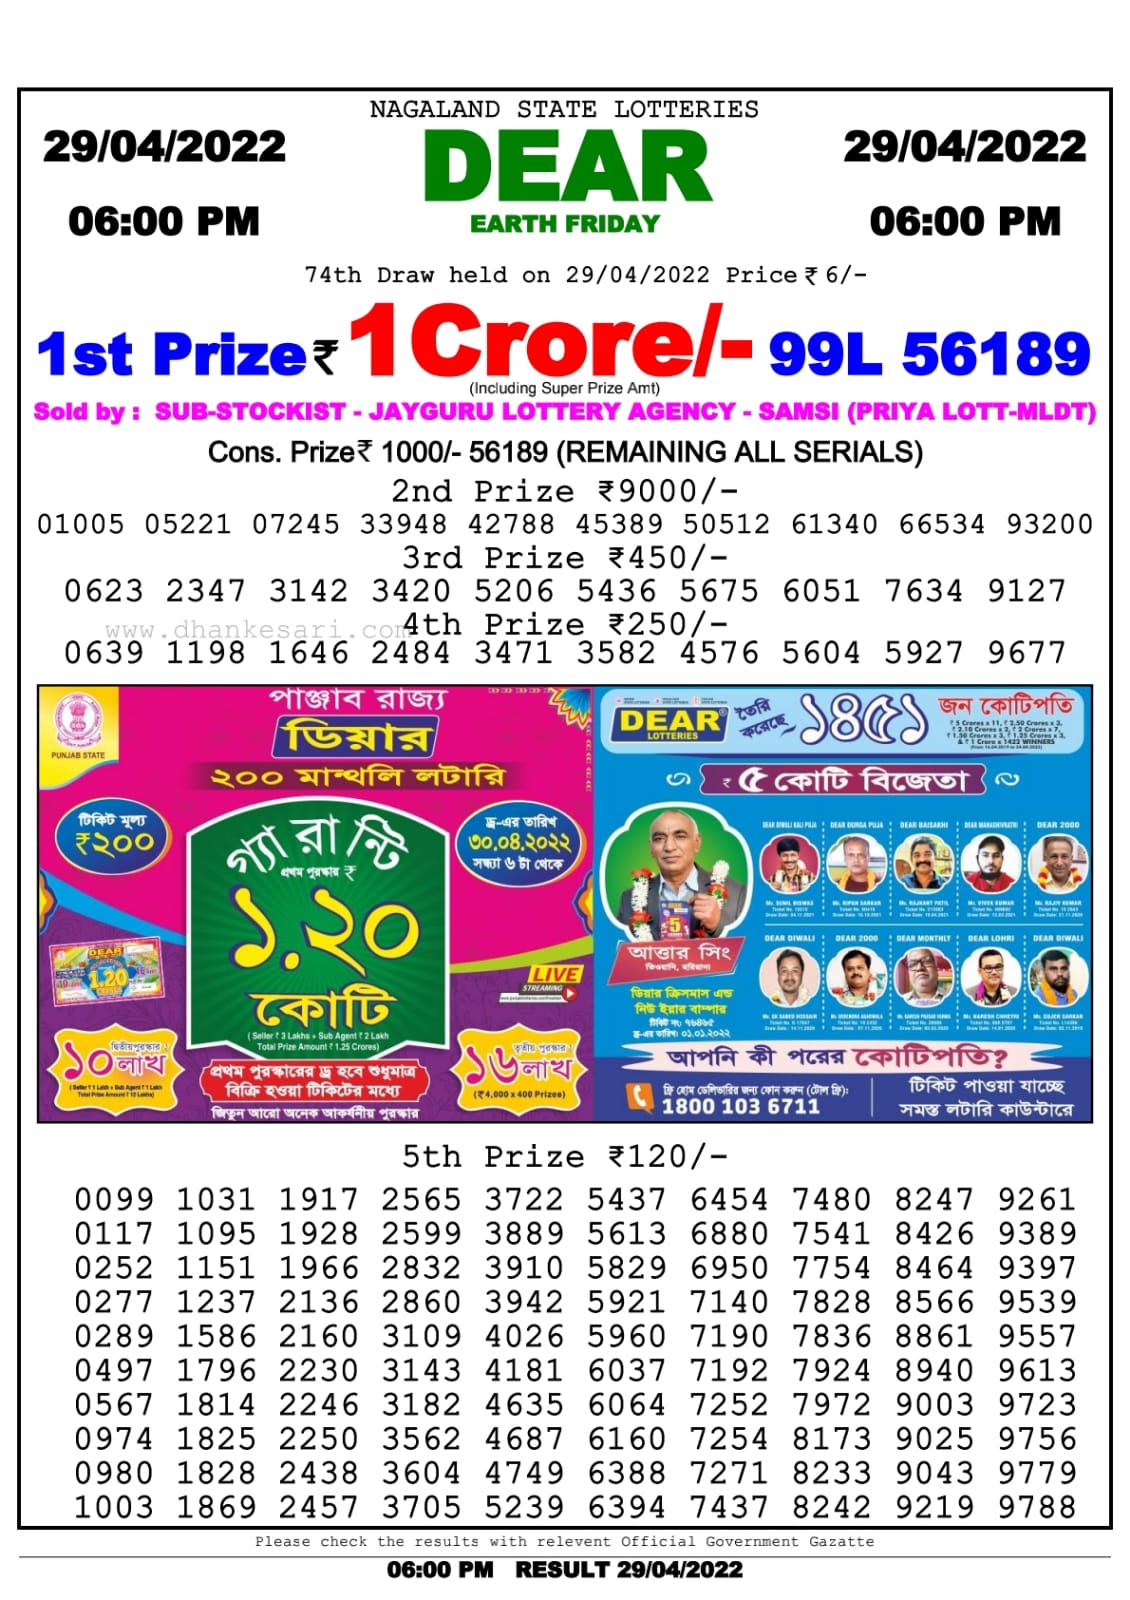 Dear Lottery Nagaland state Lottery Results 06.00 pm 29.04.2022